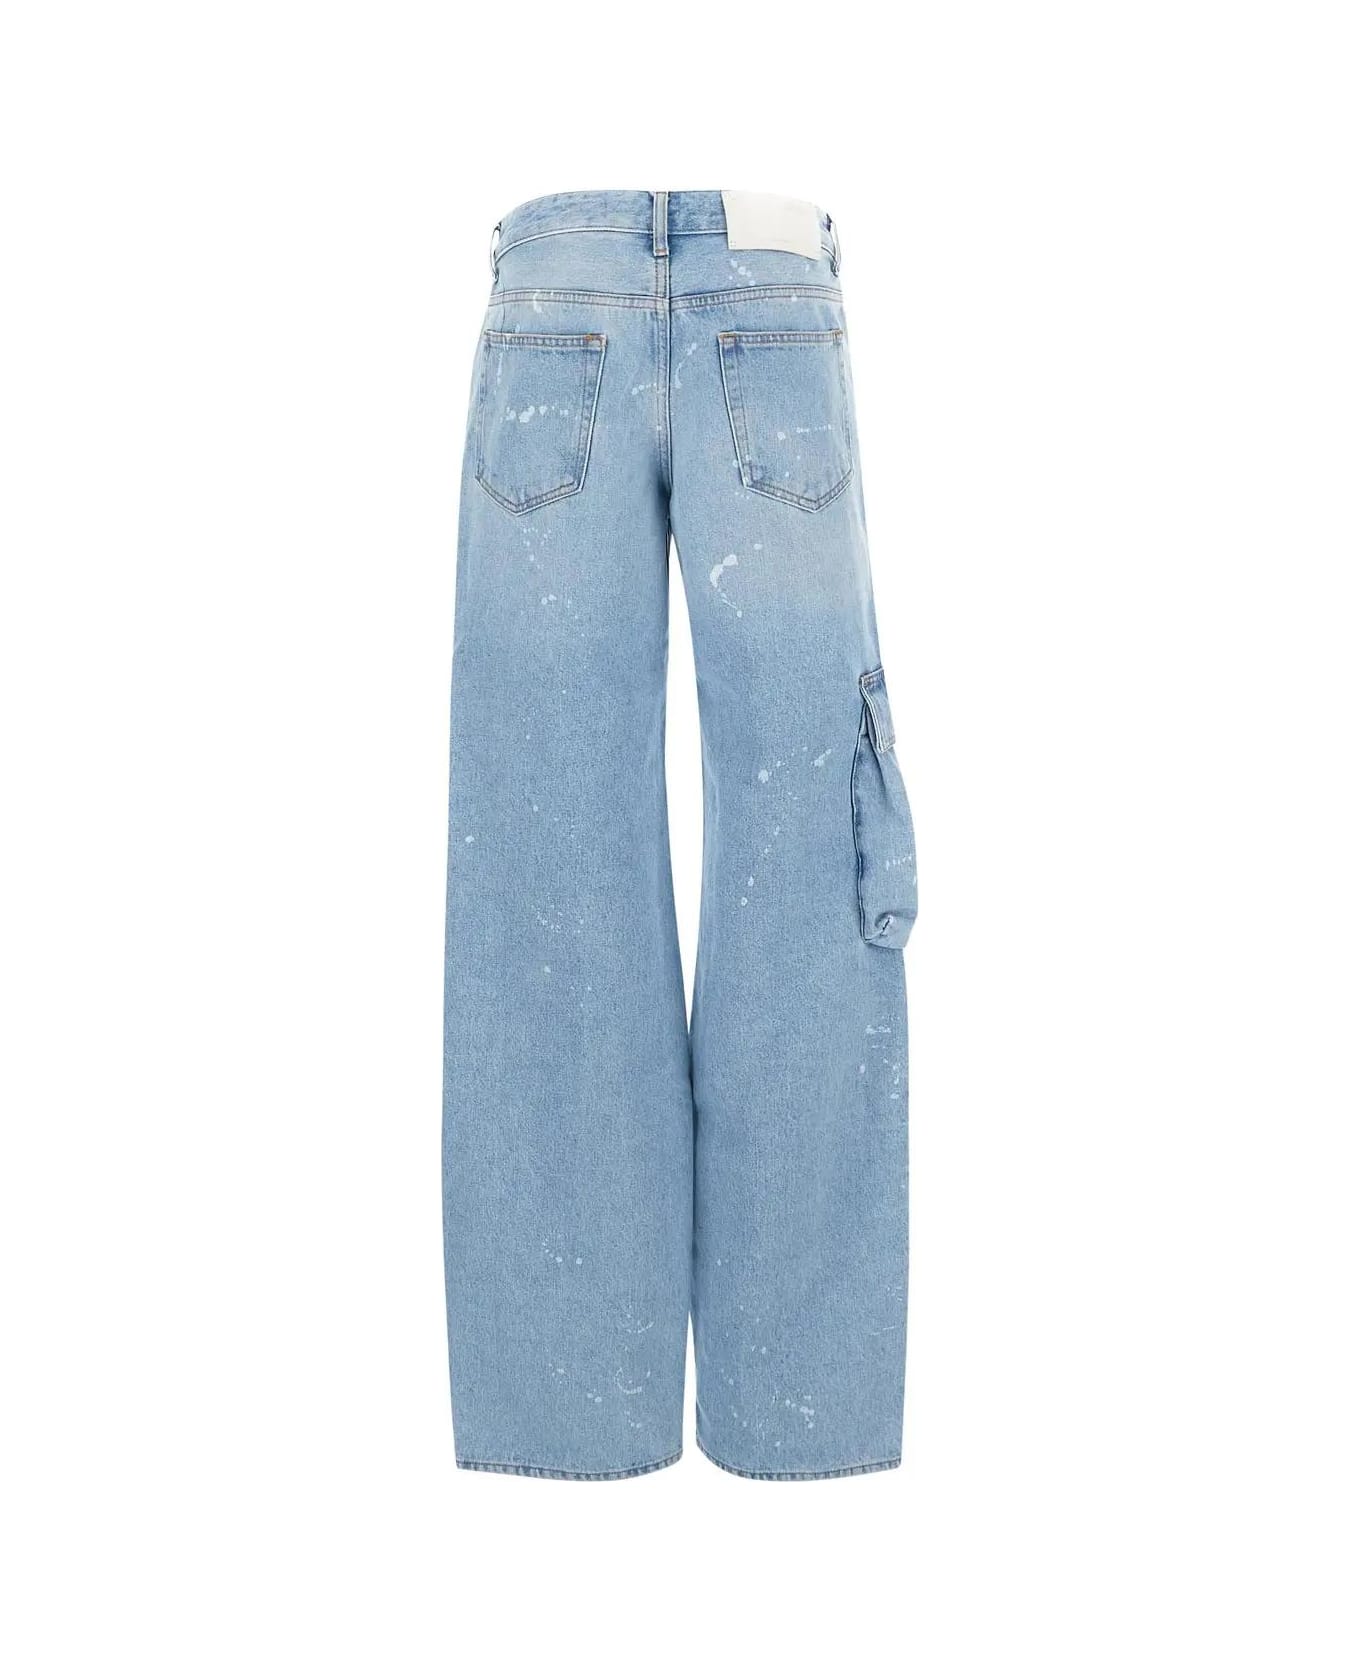 Off-White Toy Box Painted Pocket Pants - LIGHT WASH